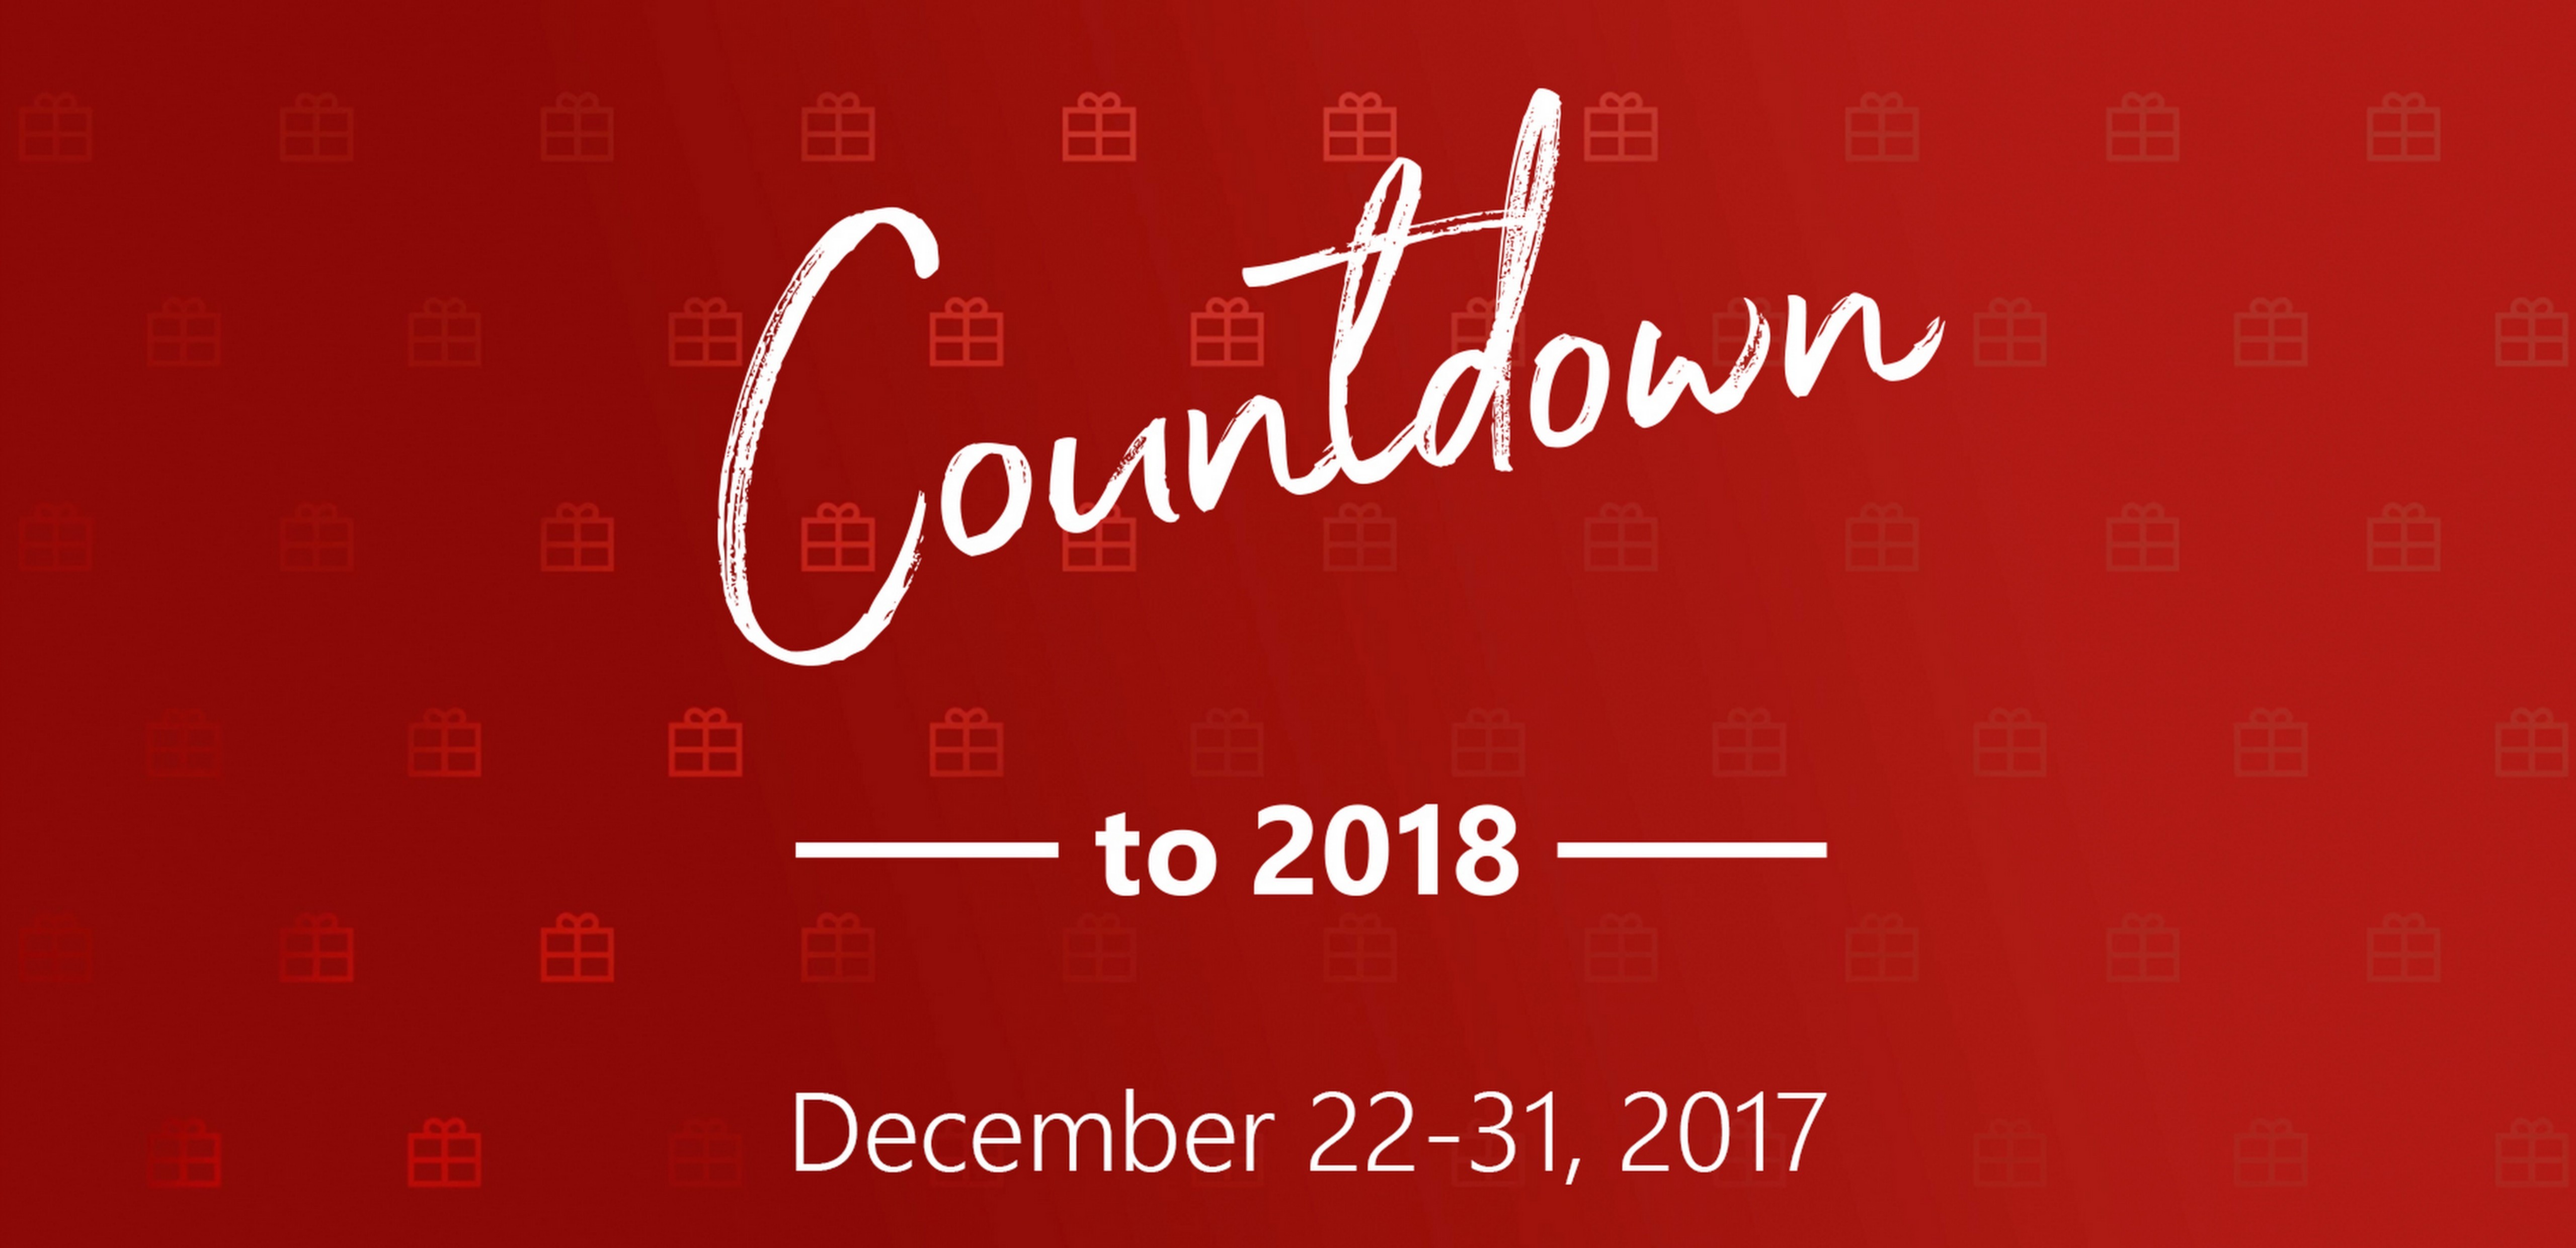 Countdown to 2018 sale in the Microsoft Store happening from December 22-31 2017